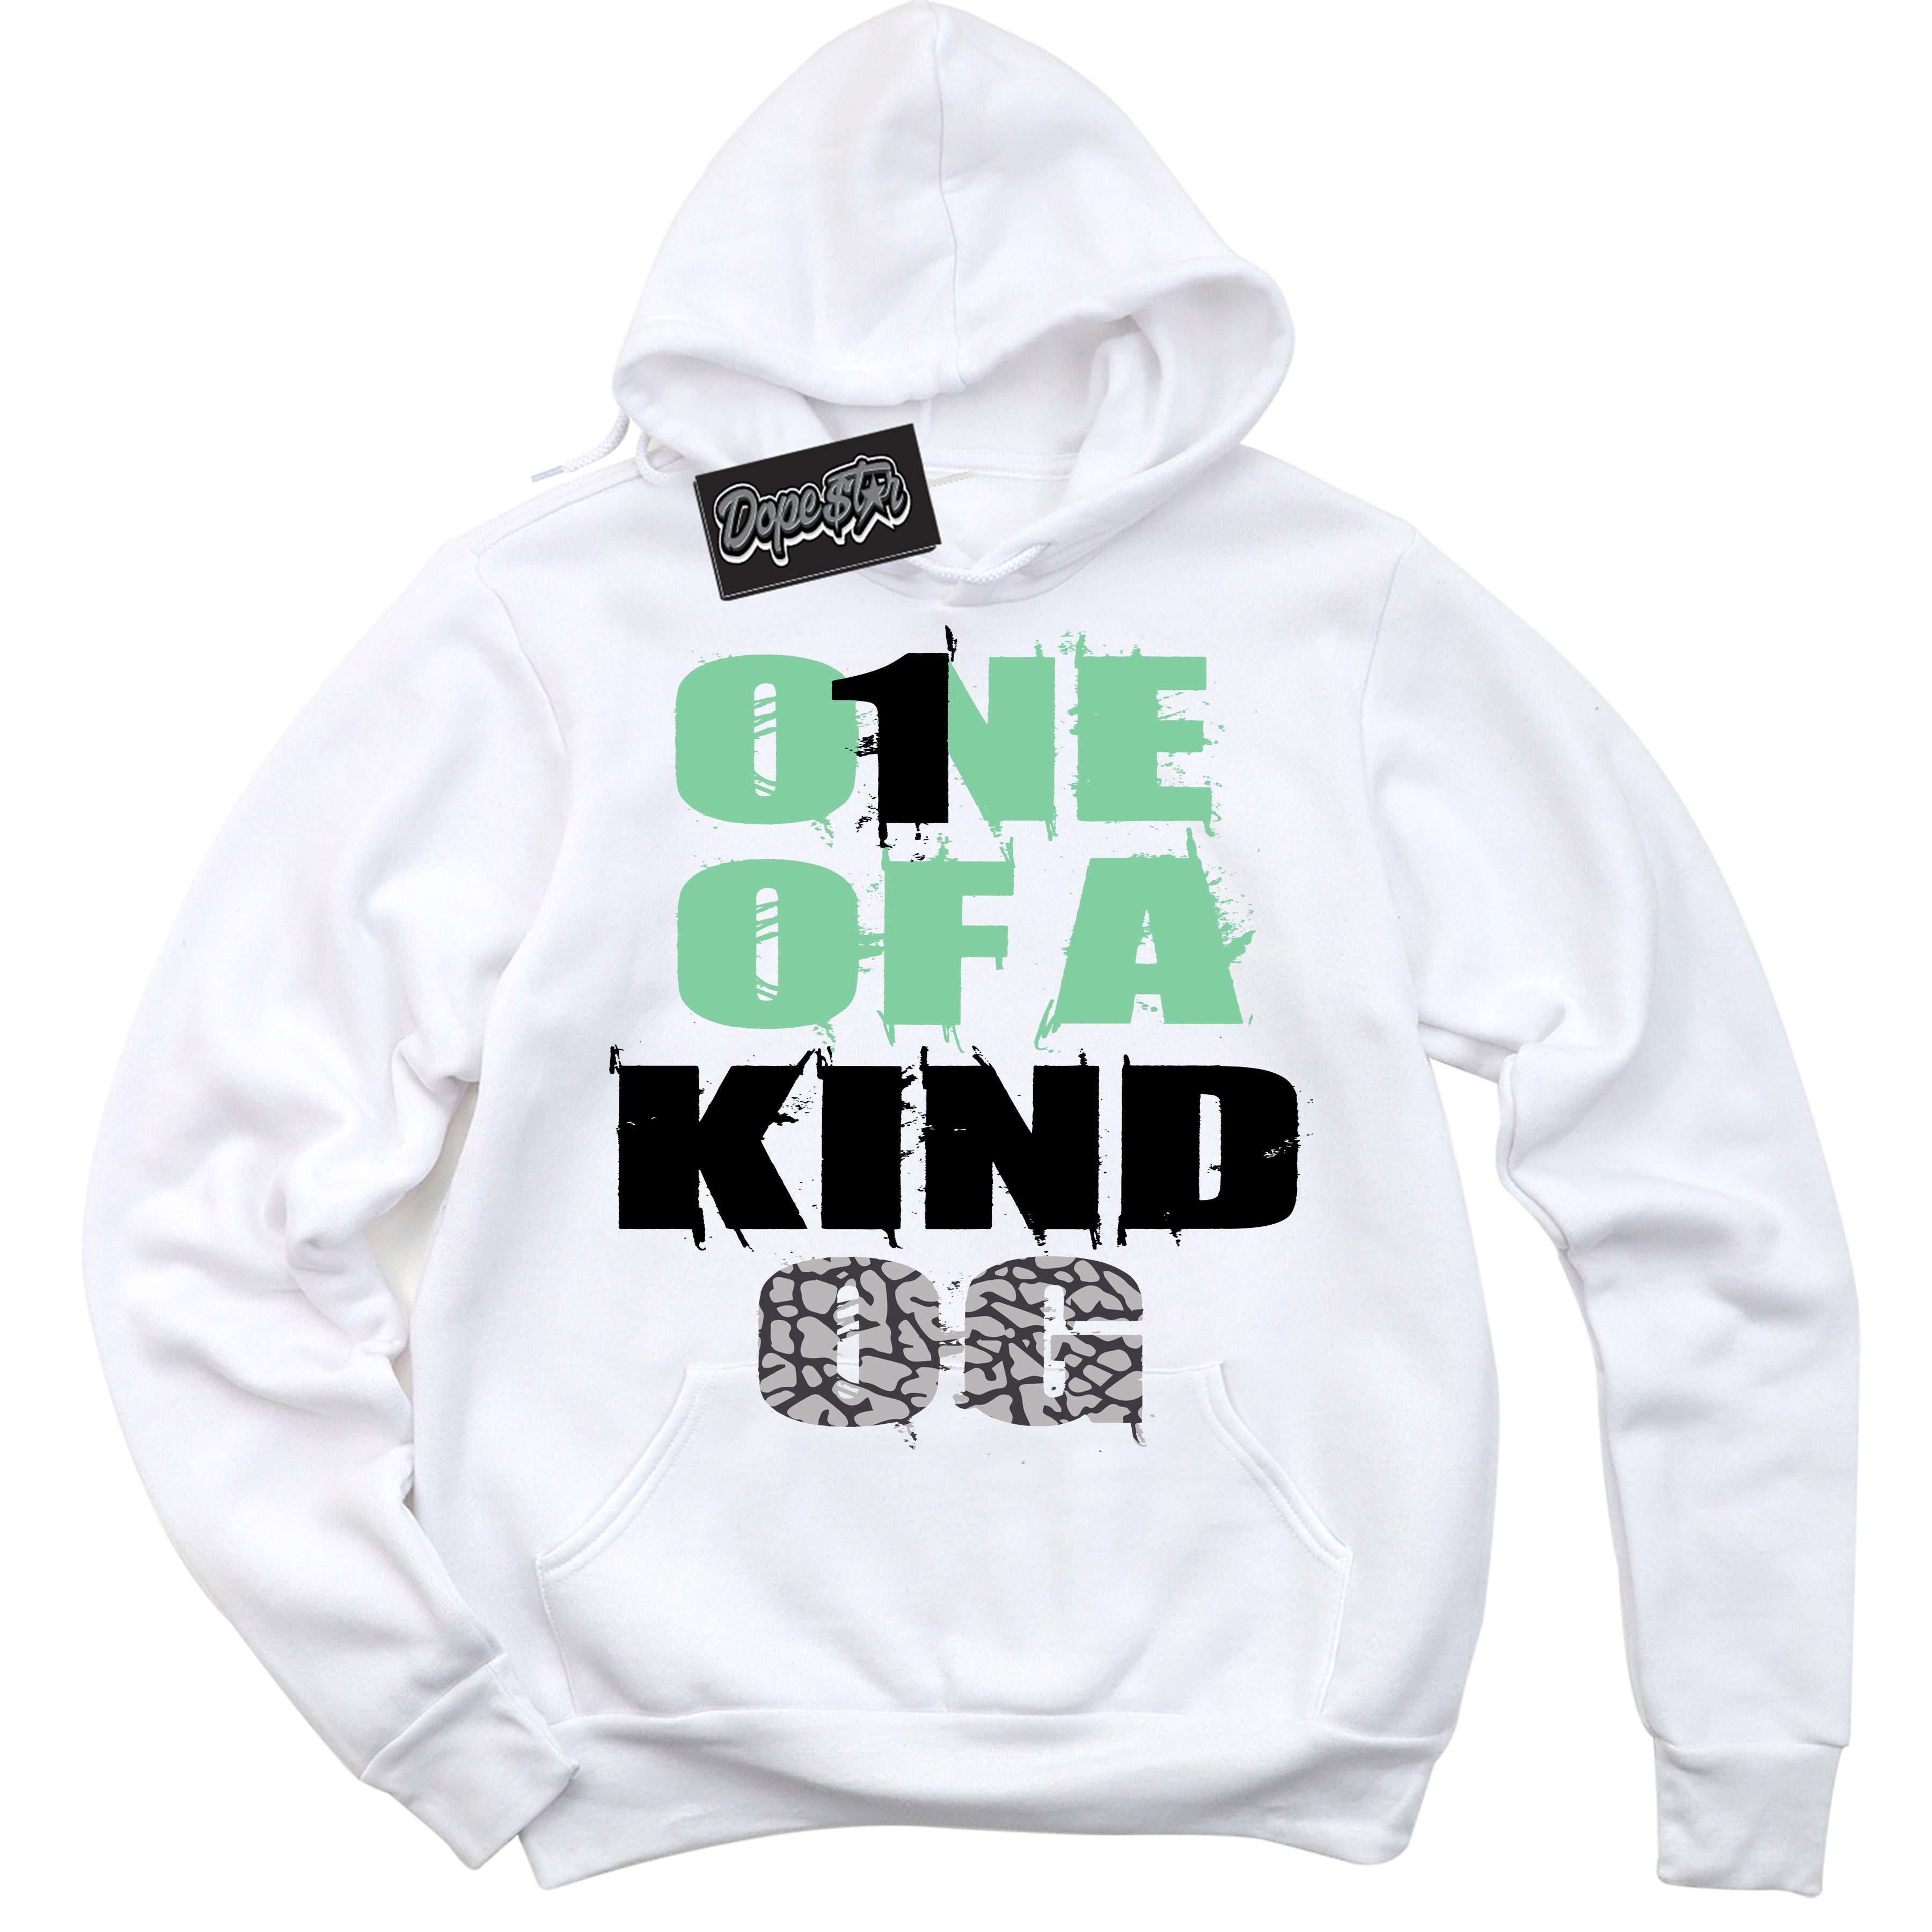 Cool White Graphic DopeStar Hoodie with “ One Of A Kind “ print, that perfectly matches Green Glow 3s sneakers